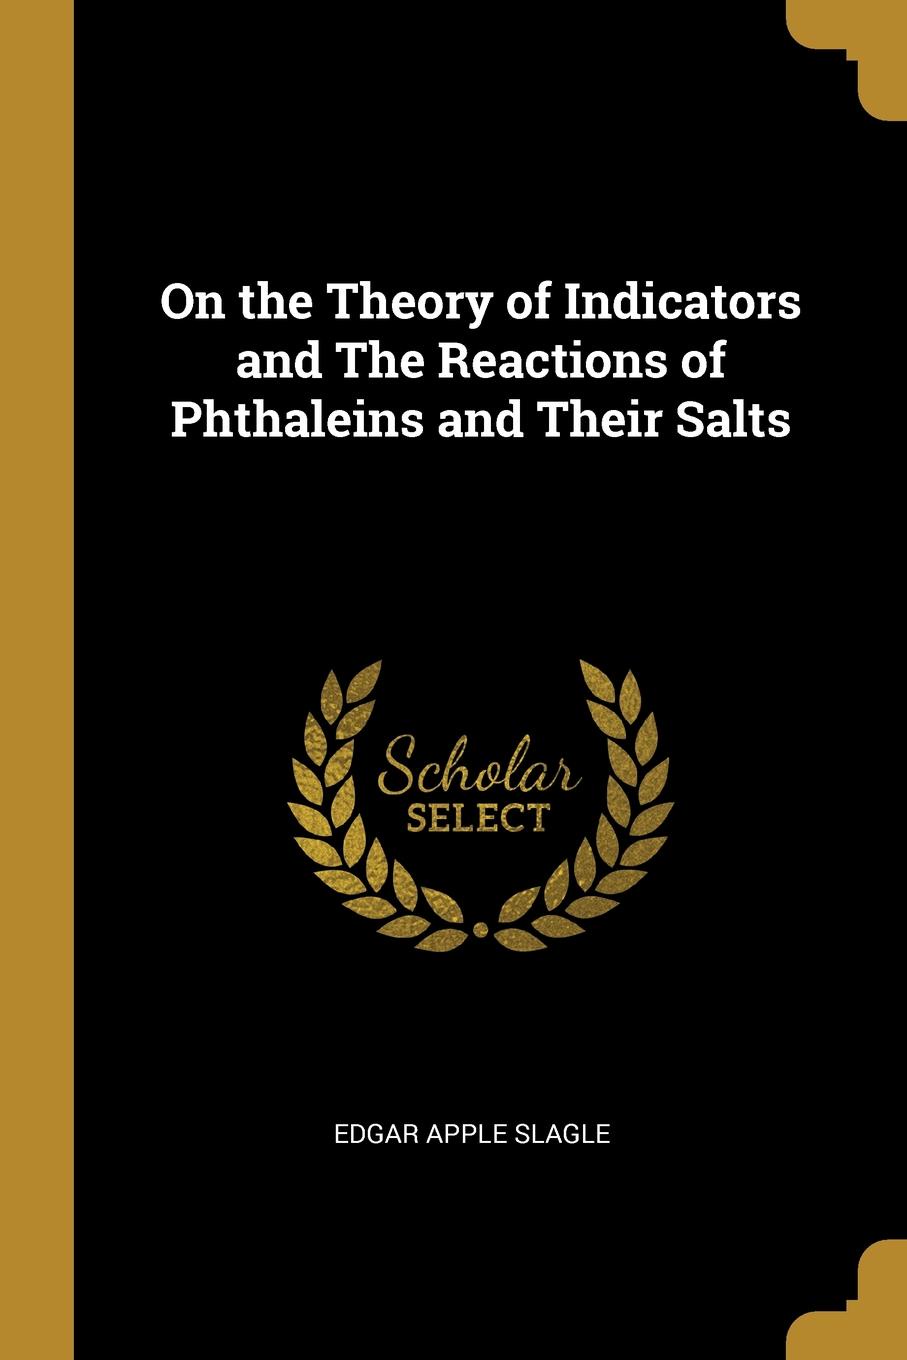 On the Theory of Indicators and The Reactions of Phthaleins and Their Salts